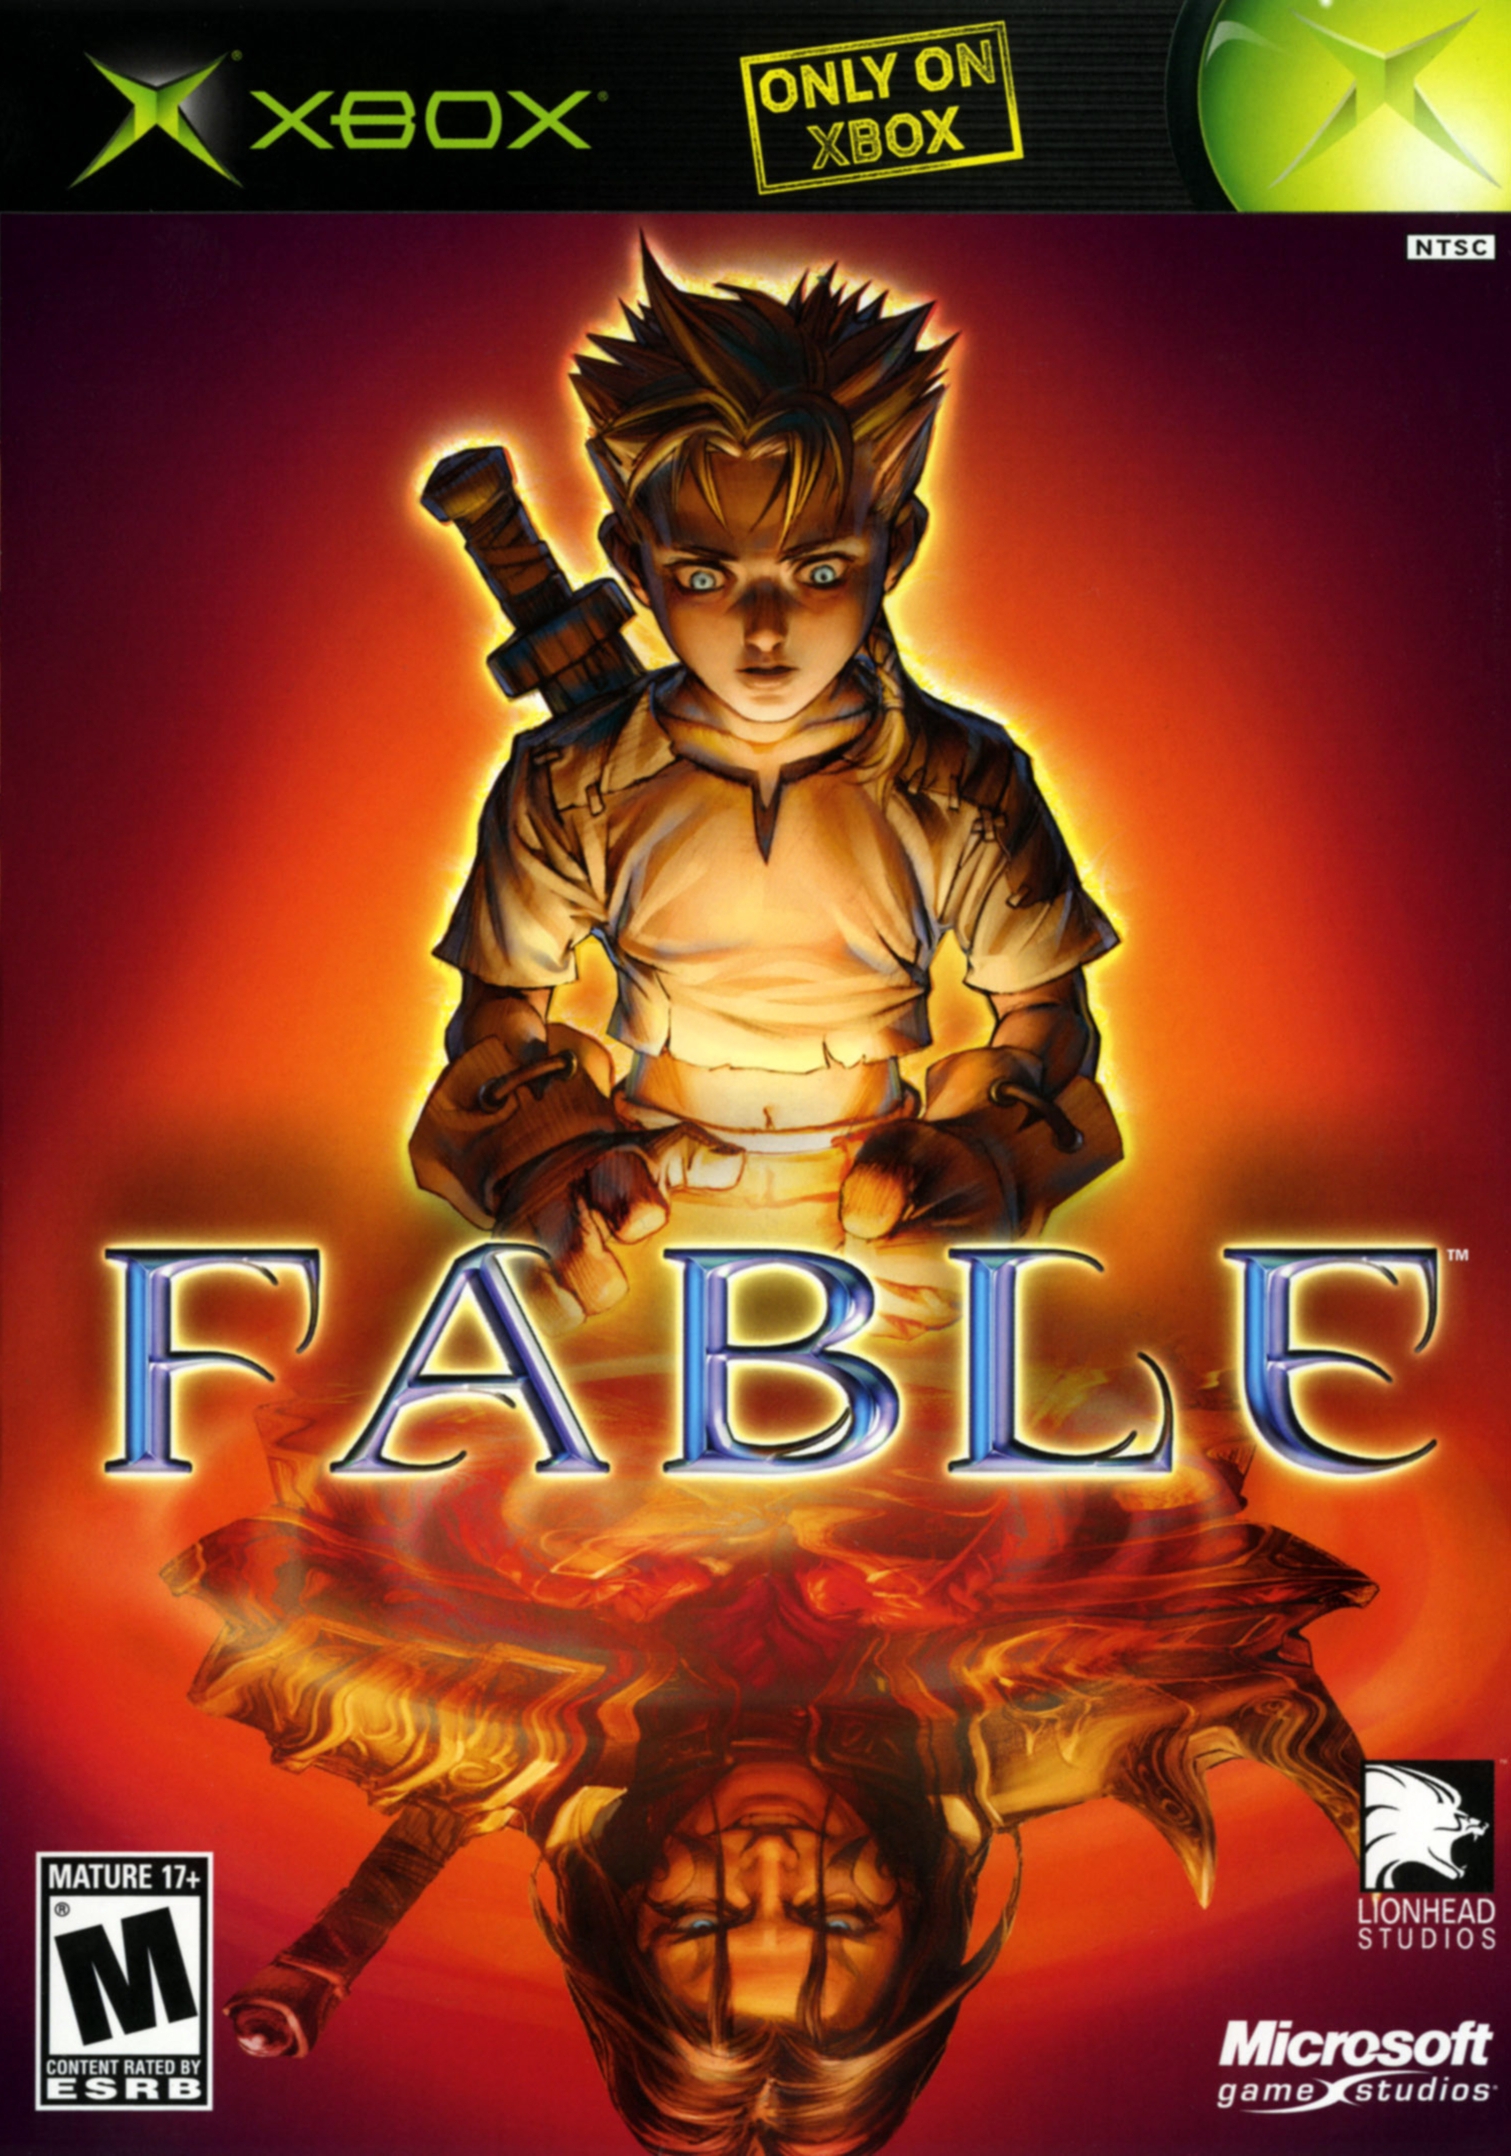 Fable for XBox